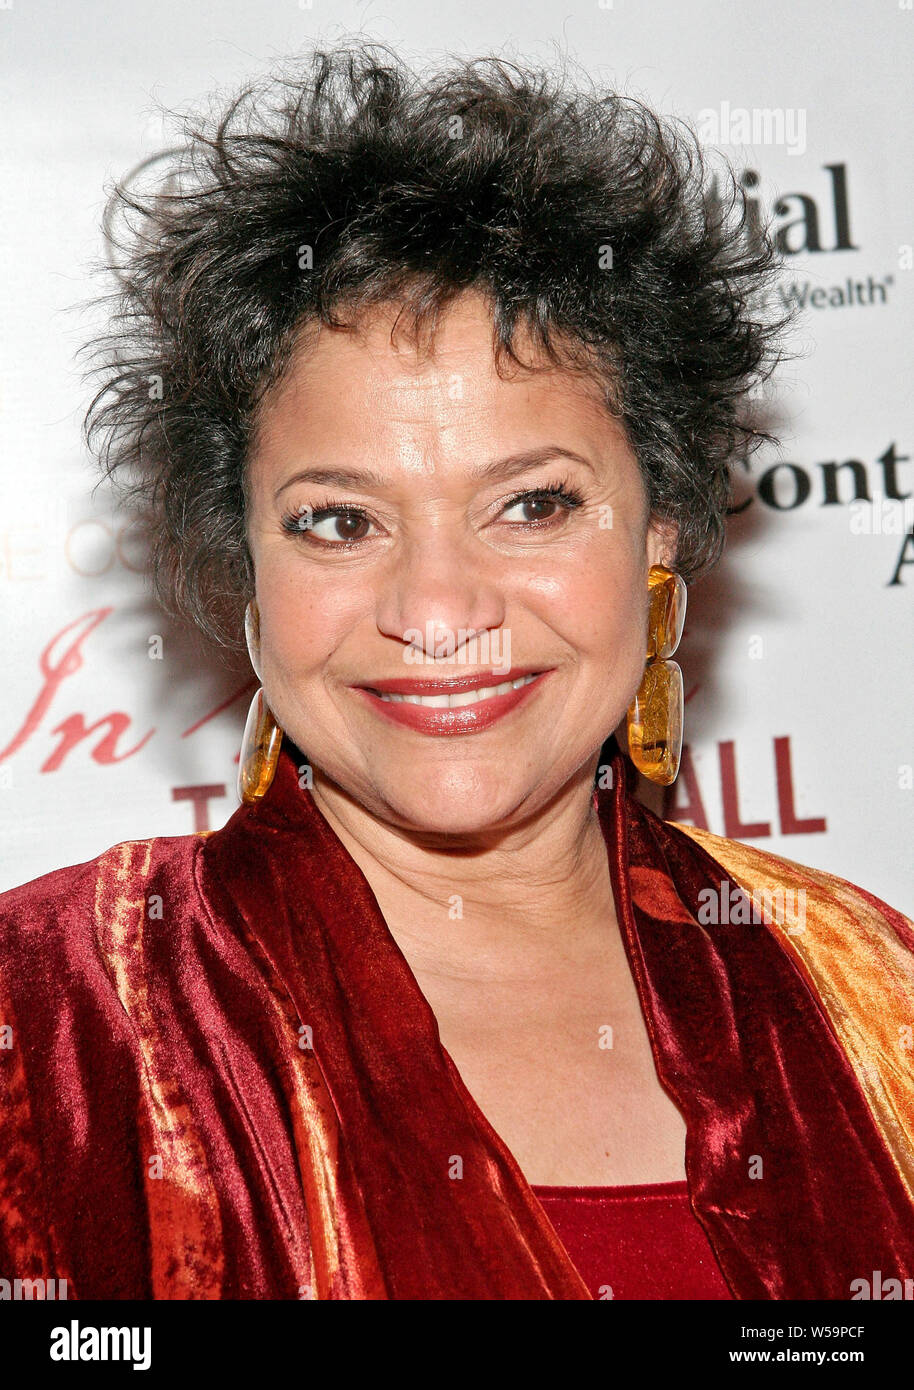 New York, USA. 11 February, 2008. Debbie Allen at the Red Ball: Evidence's "Grace in Winter" gala at The Hudson Theater, Millennium Broadway Hotel. Credit: Steve Mack/Alamy Stock Photo